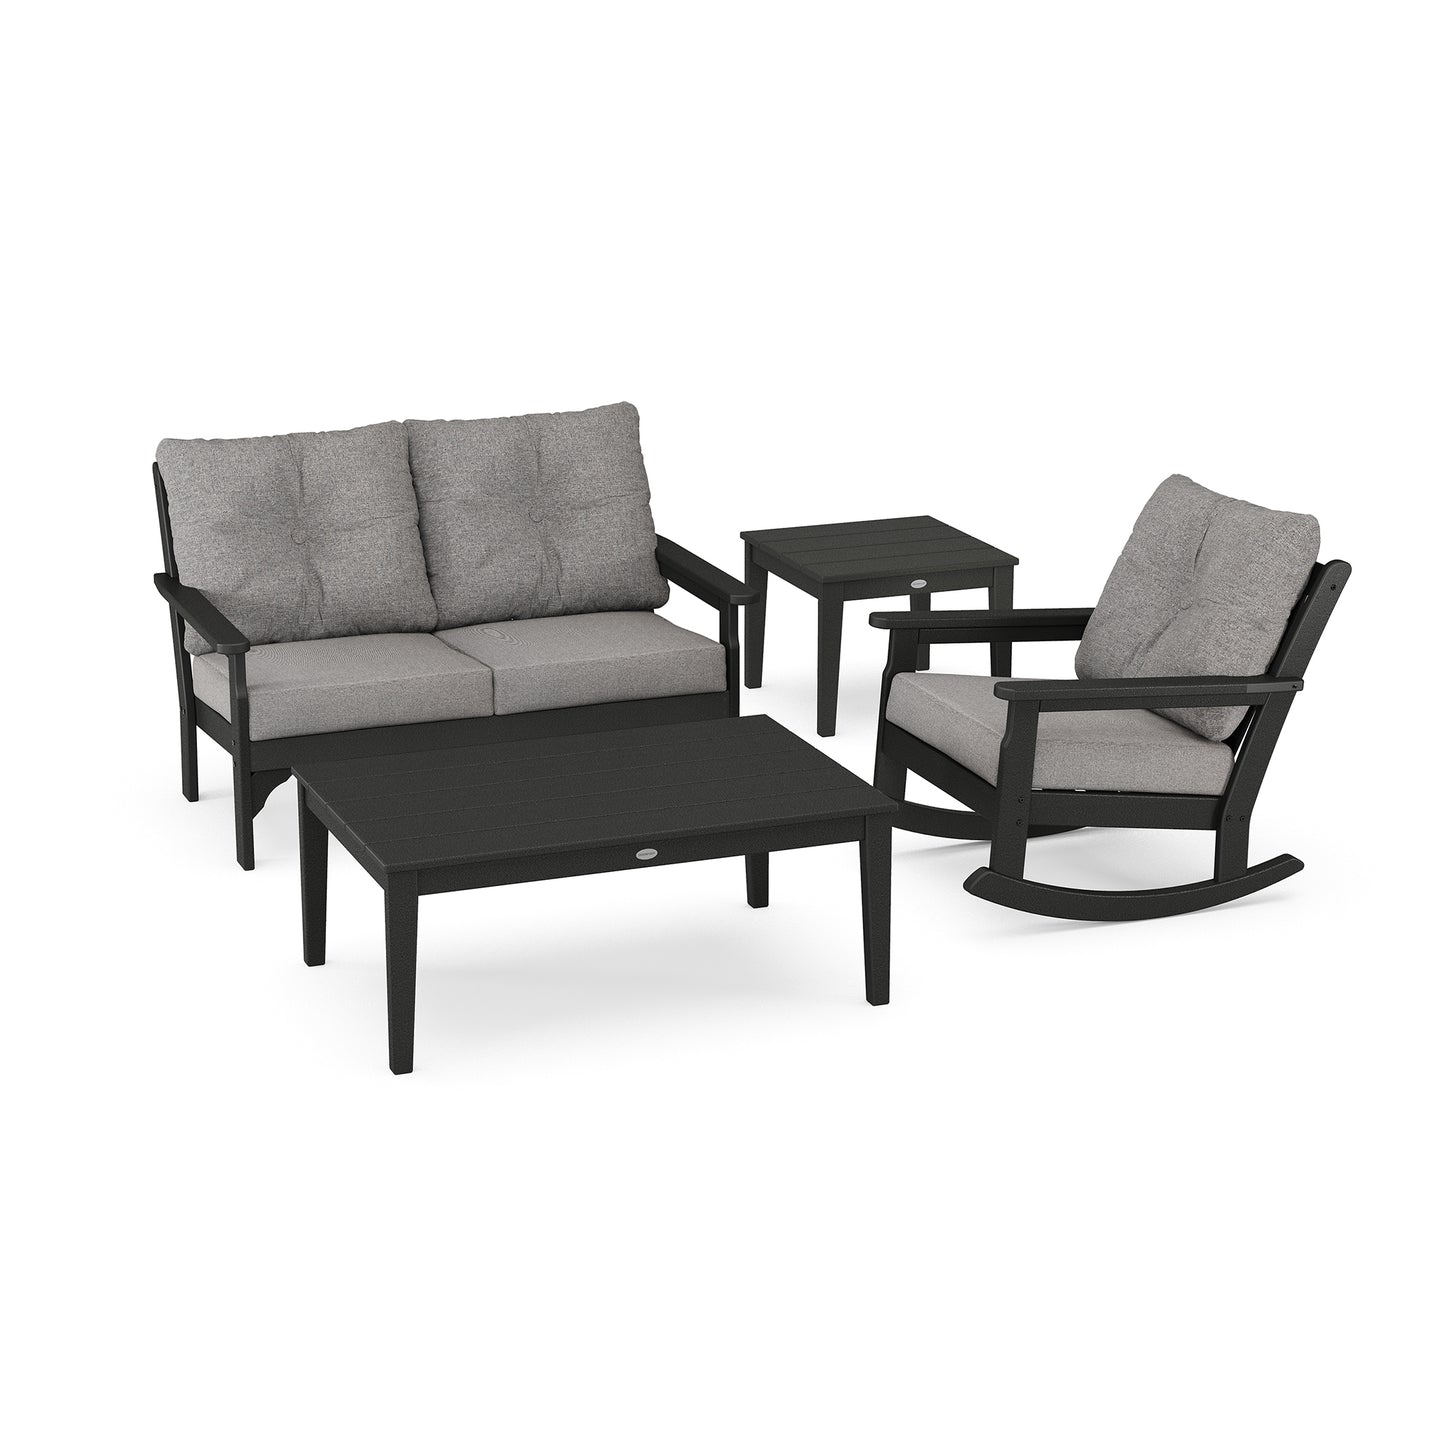 A contemporary luxury outdoor furniture set featuring a POLYWOOD Vineyard 4-Piece Deep Seating Rocker Set, all in black framing with gray cushions.